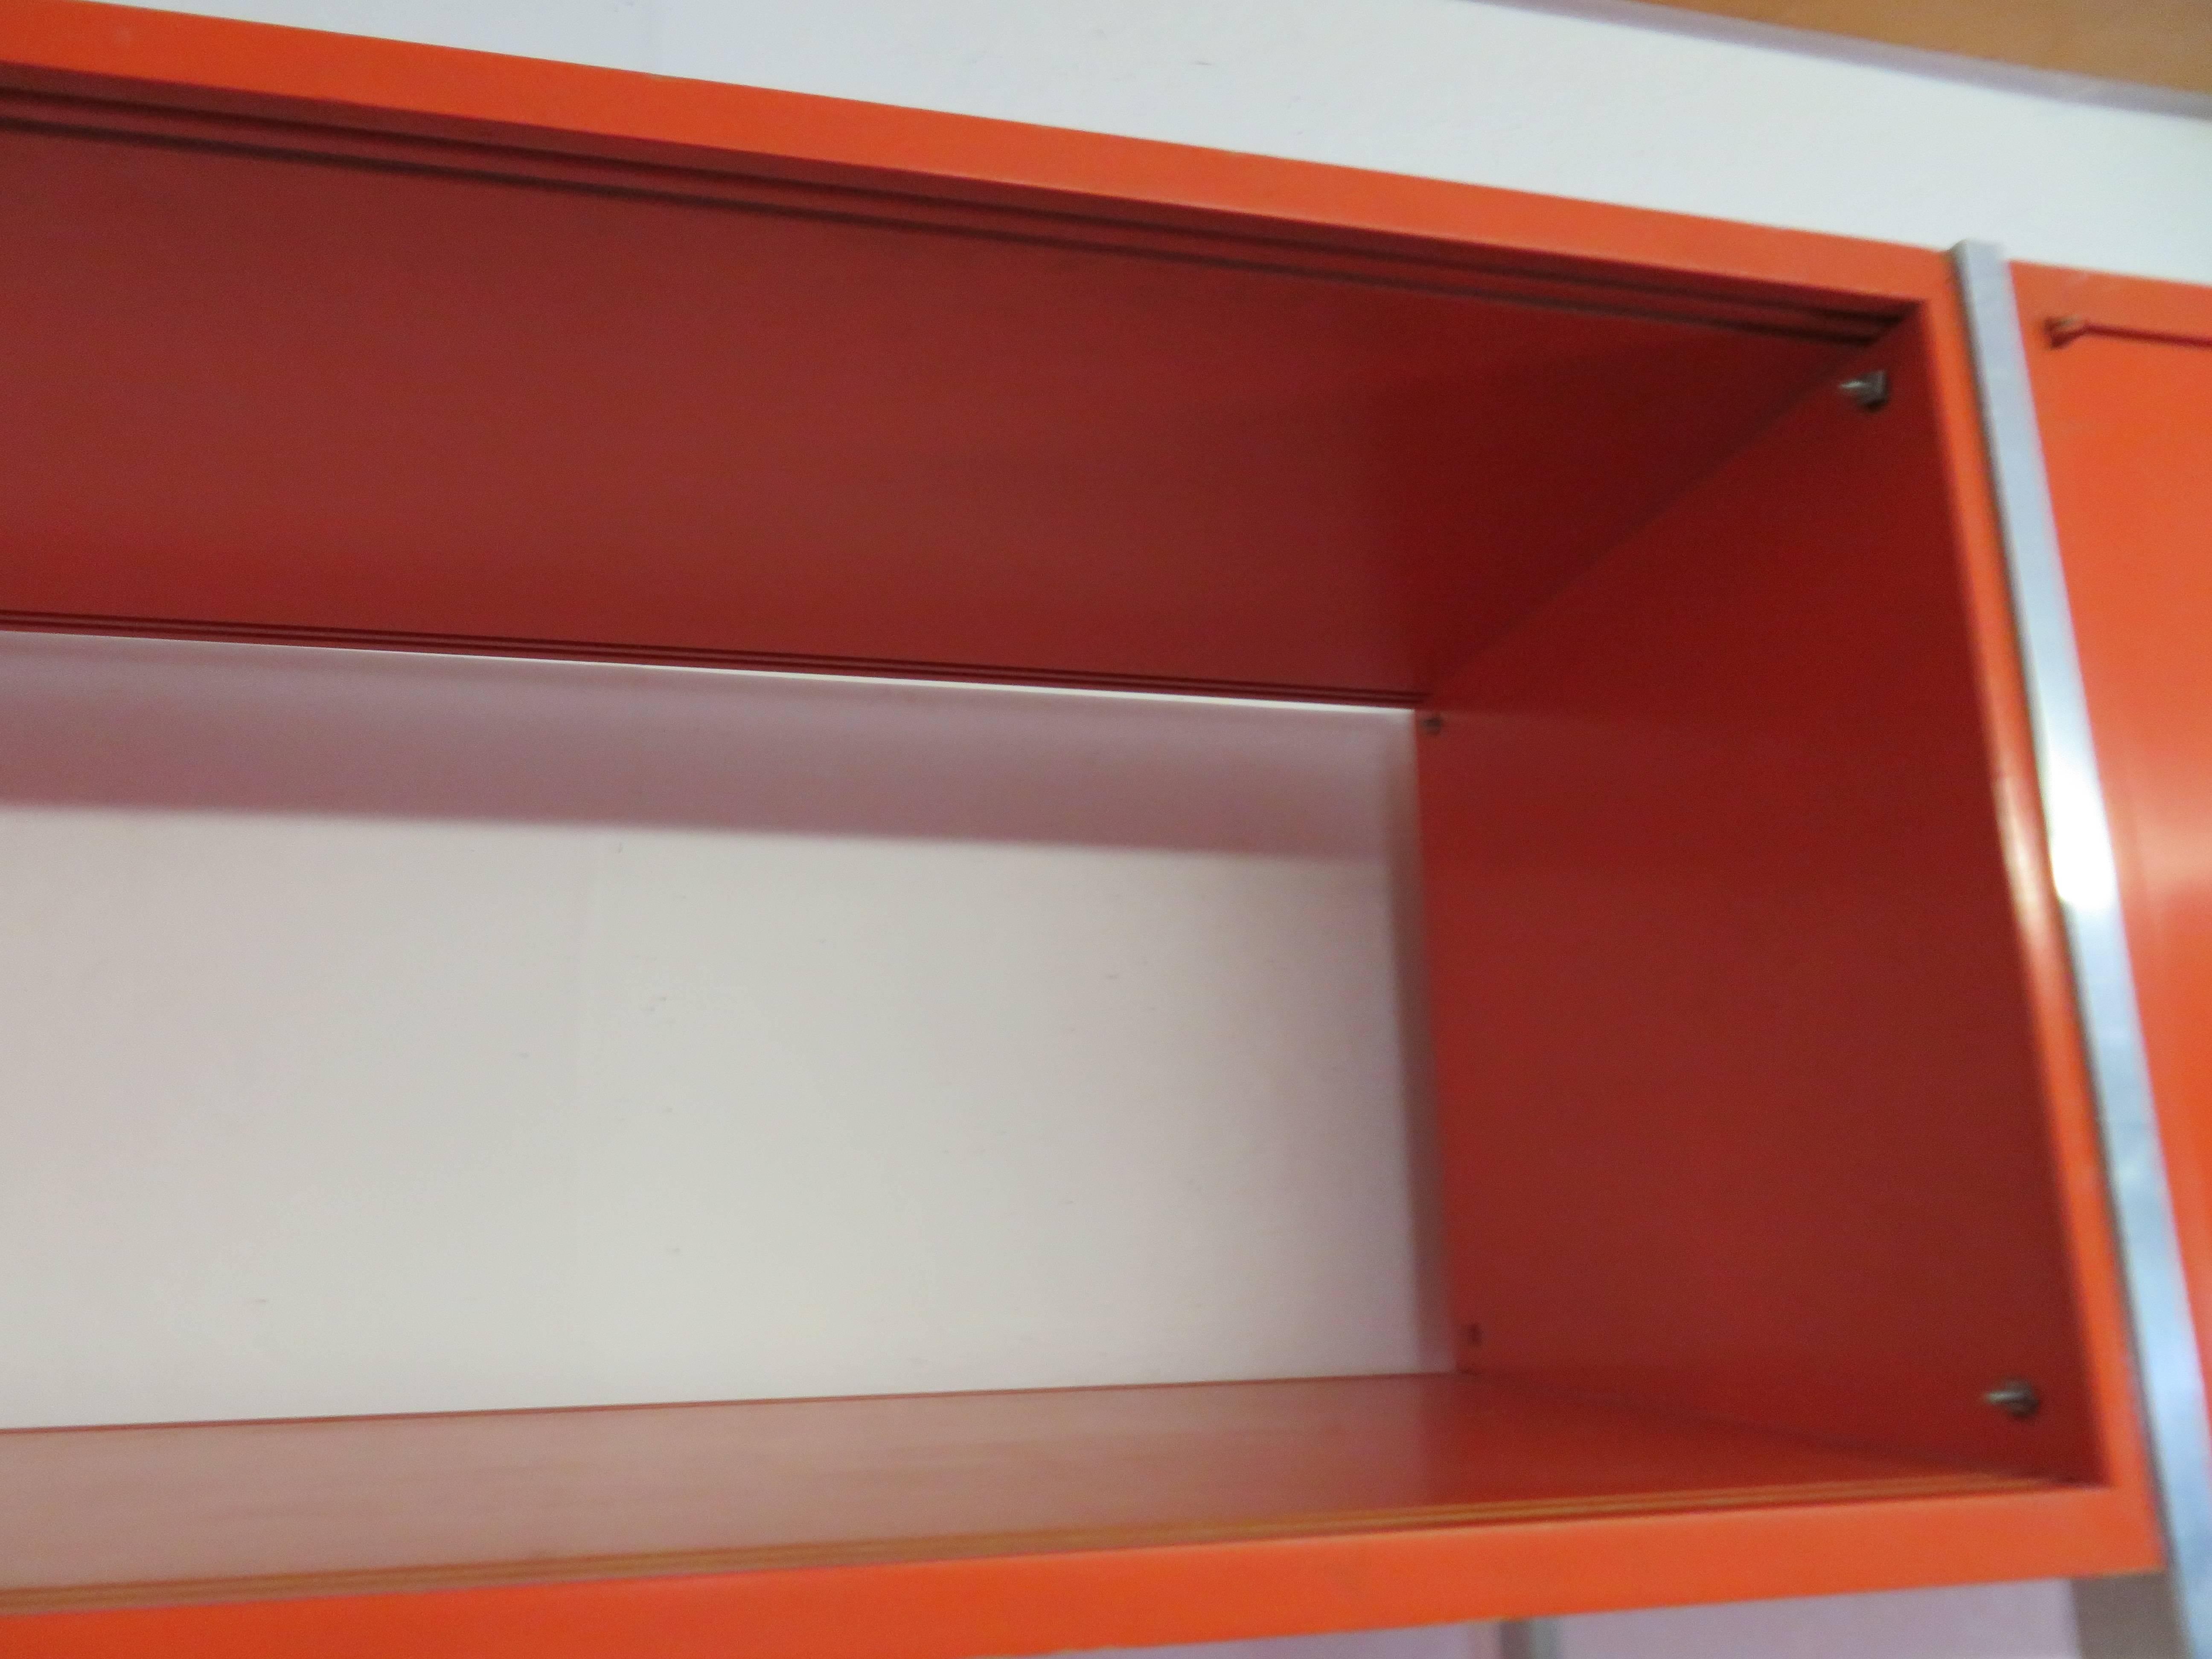 Rare Orange Three-Bay Wall Unit by Founders in Baughman Style Mid-Century Modern 1